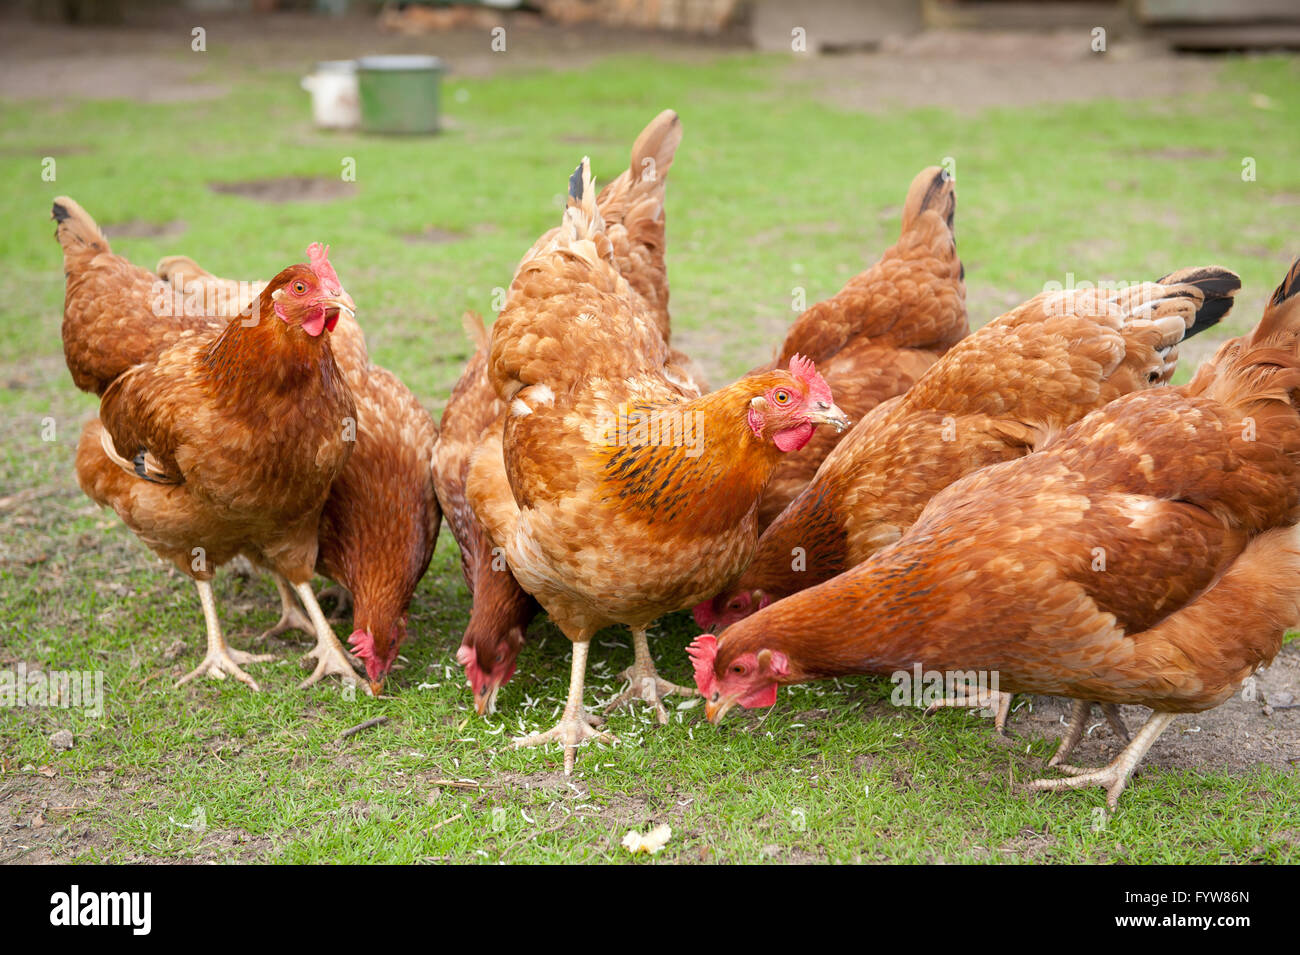 Hens flock eating noodles, Rhode Island Red hens with brown plumage, birds eating in private backyard, calm domestic fowl. Stock Photo